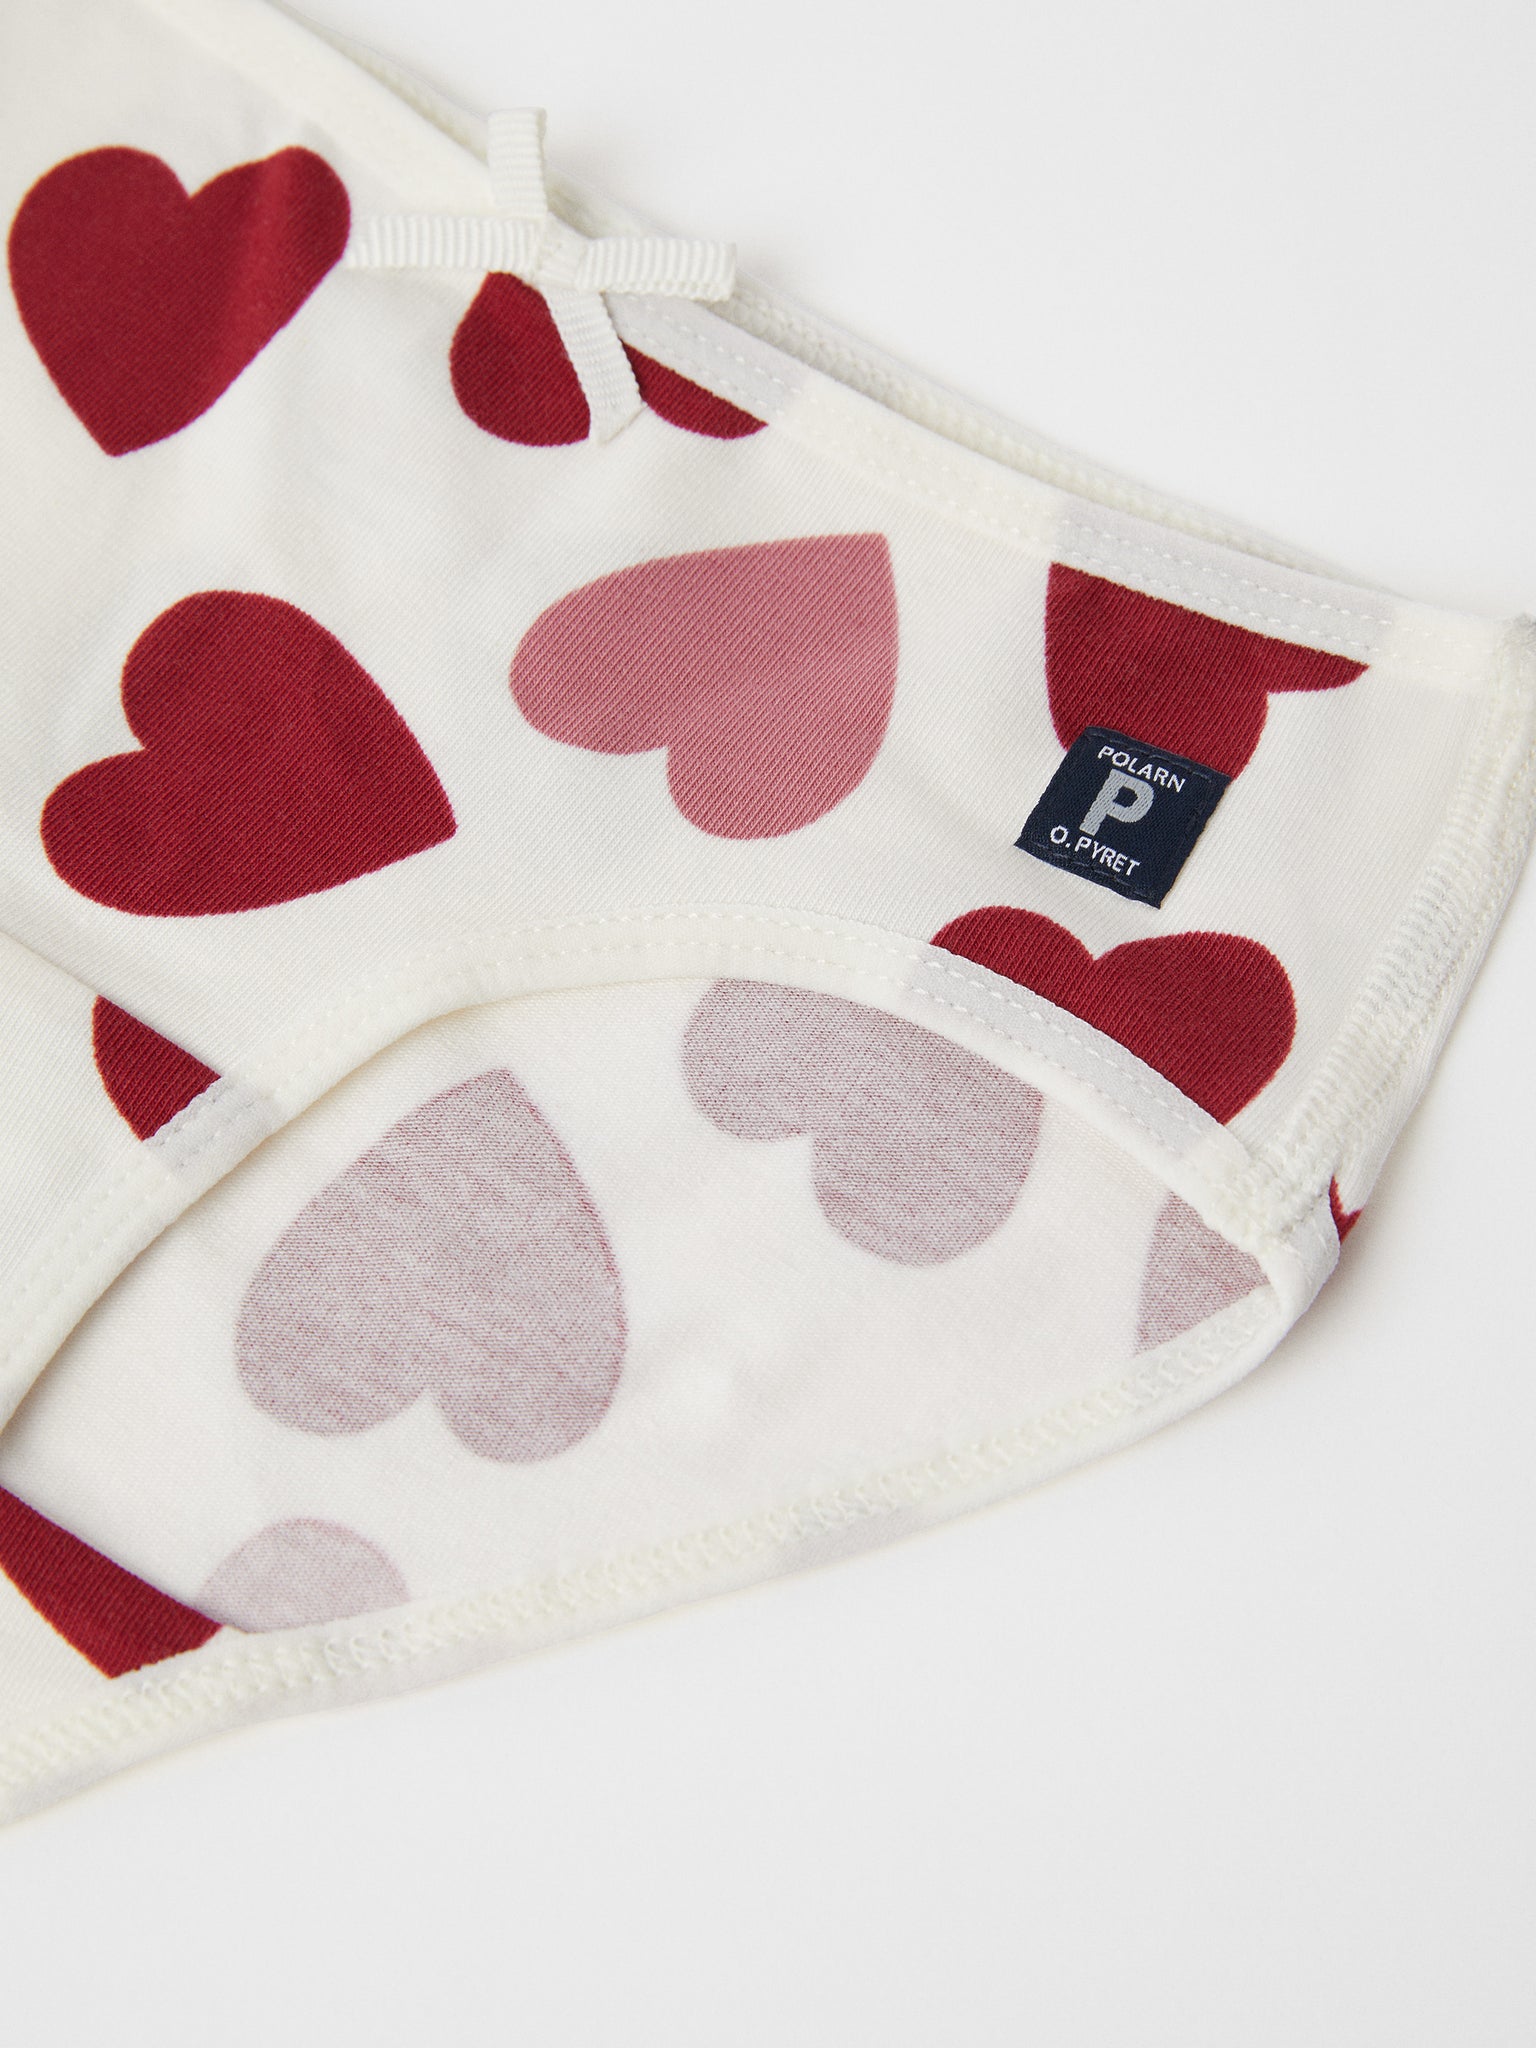 Girls White Organic Cotton Briefs from the Polarn O. Pyret kidswear collection. The best ethical kids clothes